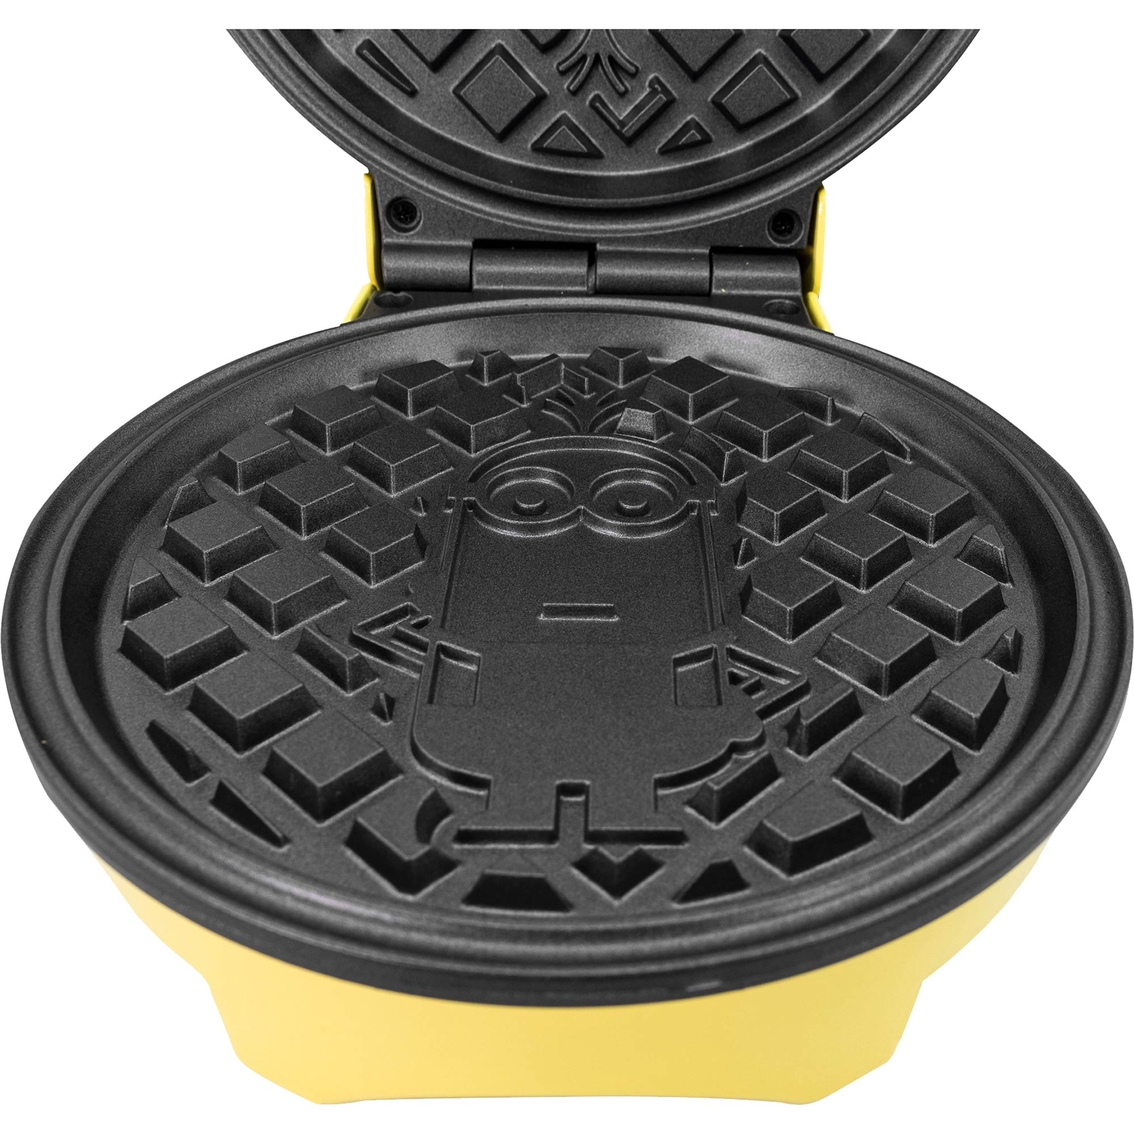 Minions Kevin Round Waffle Maker - Image 10 of 10